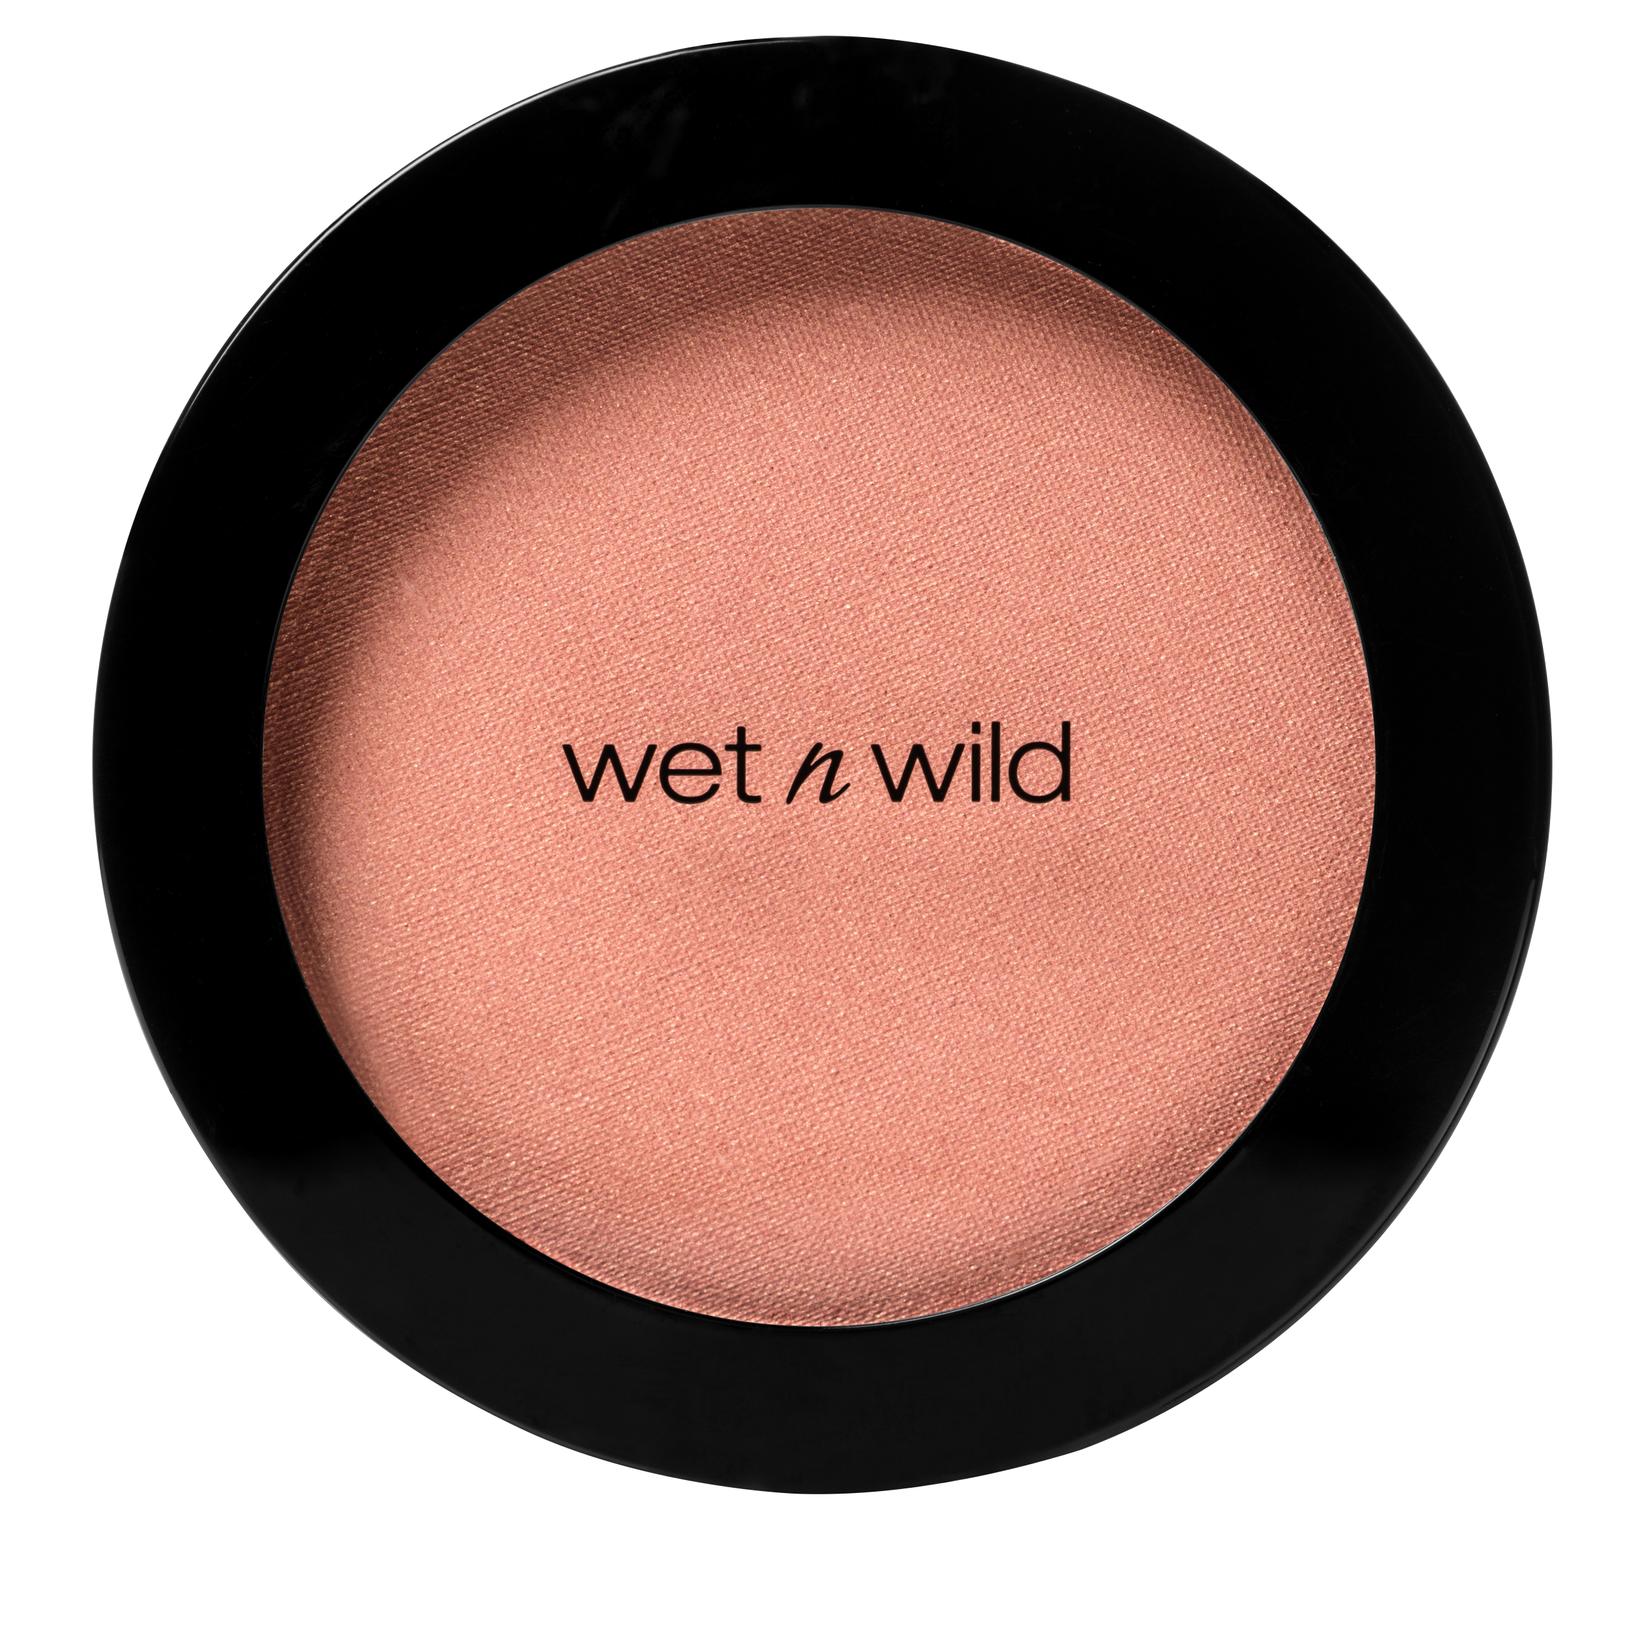 Selected image for wet n wild coloricon Rumenilo, 1111555E Pearlescent pink, 5.95 g